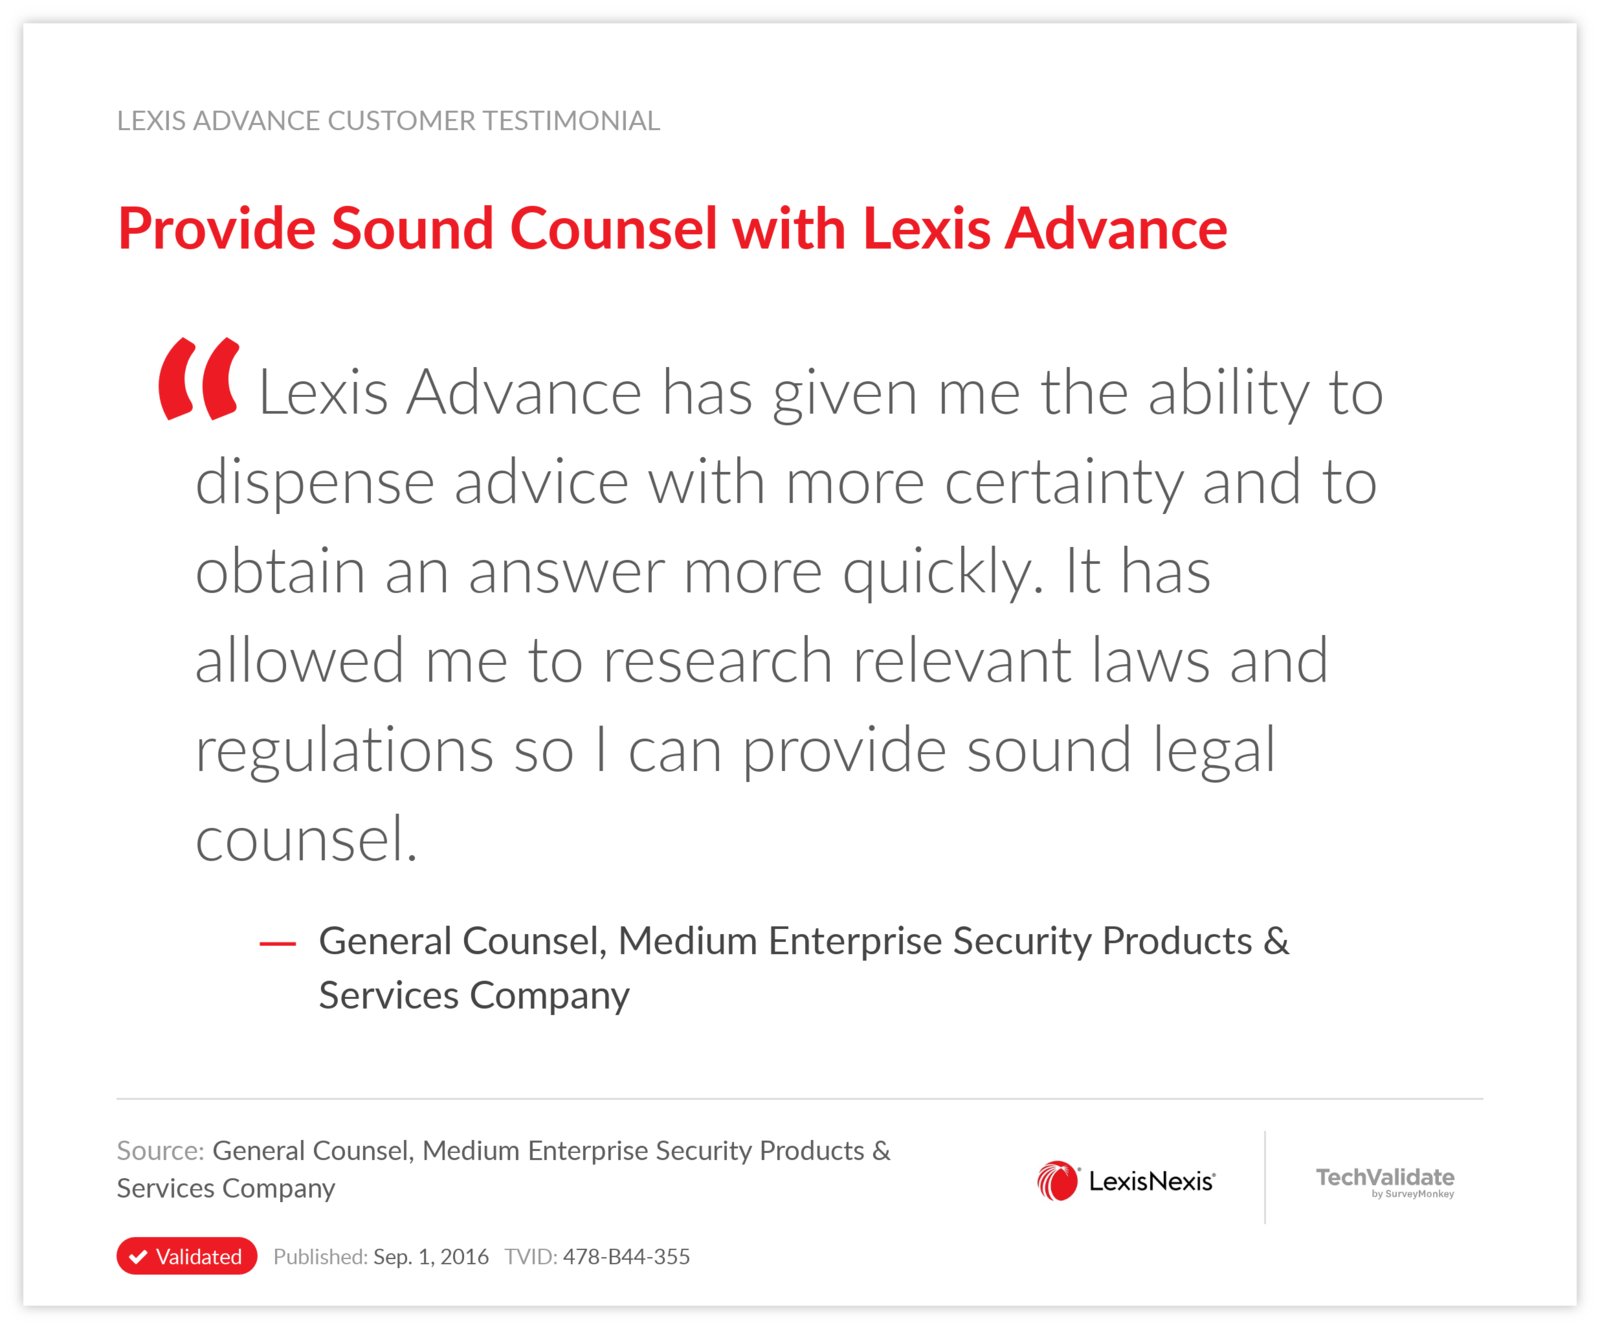 Provide Sound Counsel with Lexis Advance